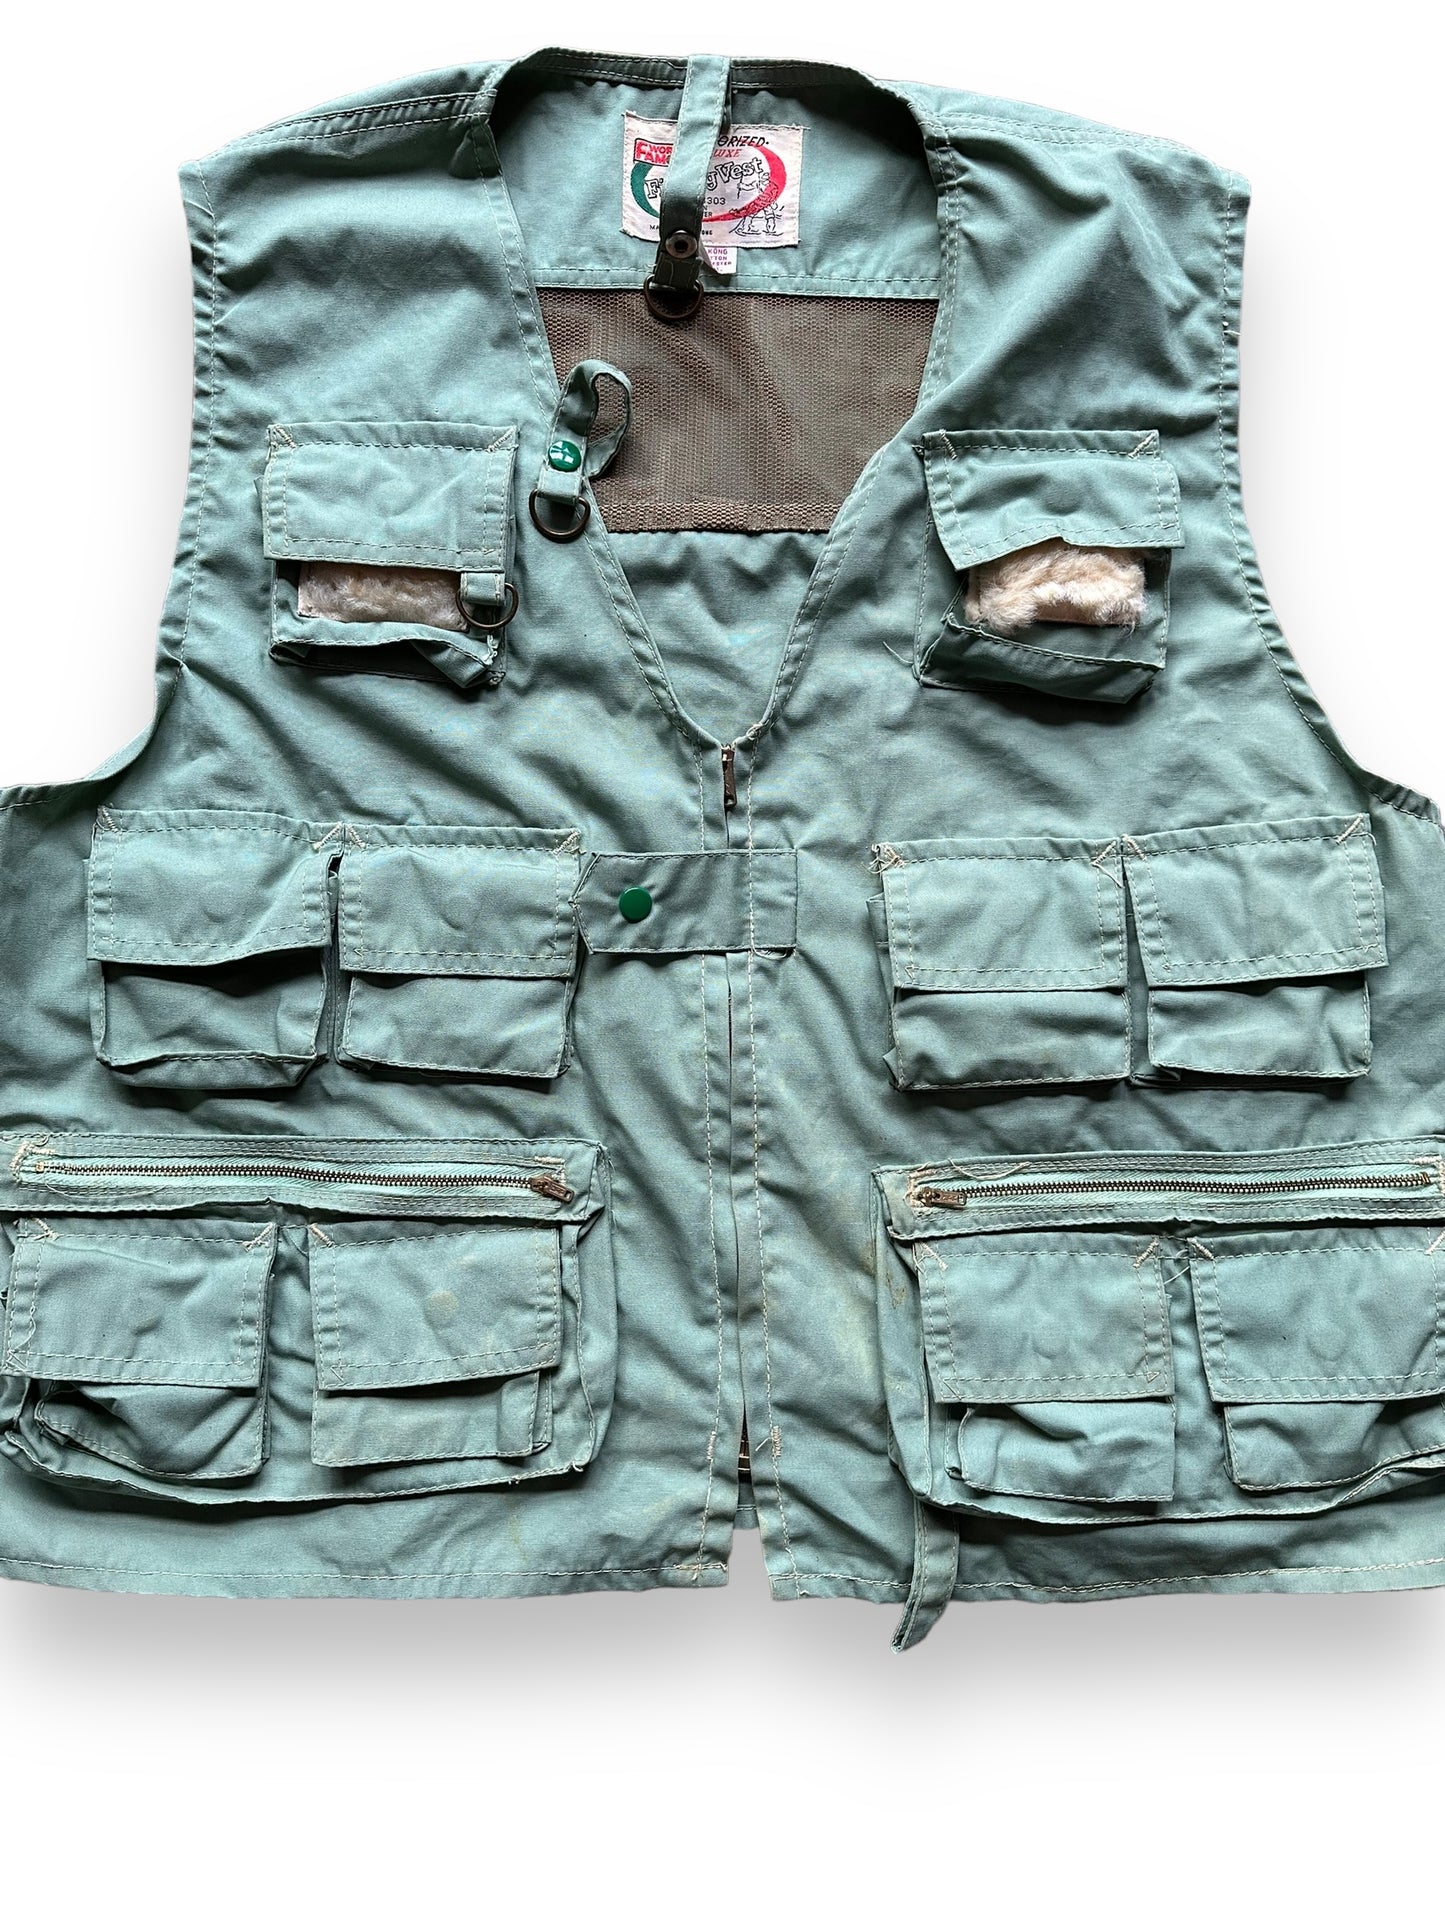 Front Detail of Vintage World Famous Fishing Vest SZ L | Vintage Fishing Vest Seattle | Barn Owl Vintage Seattle